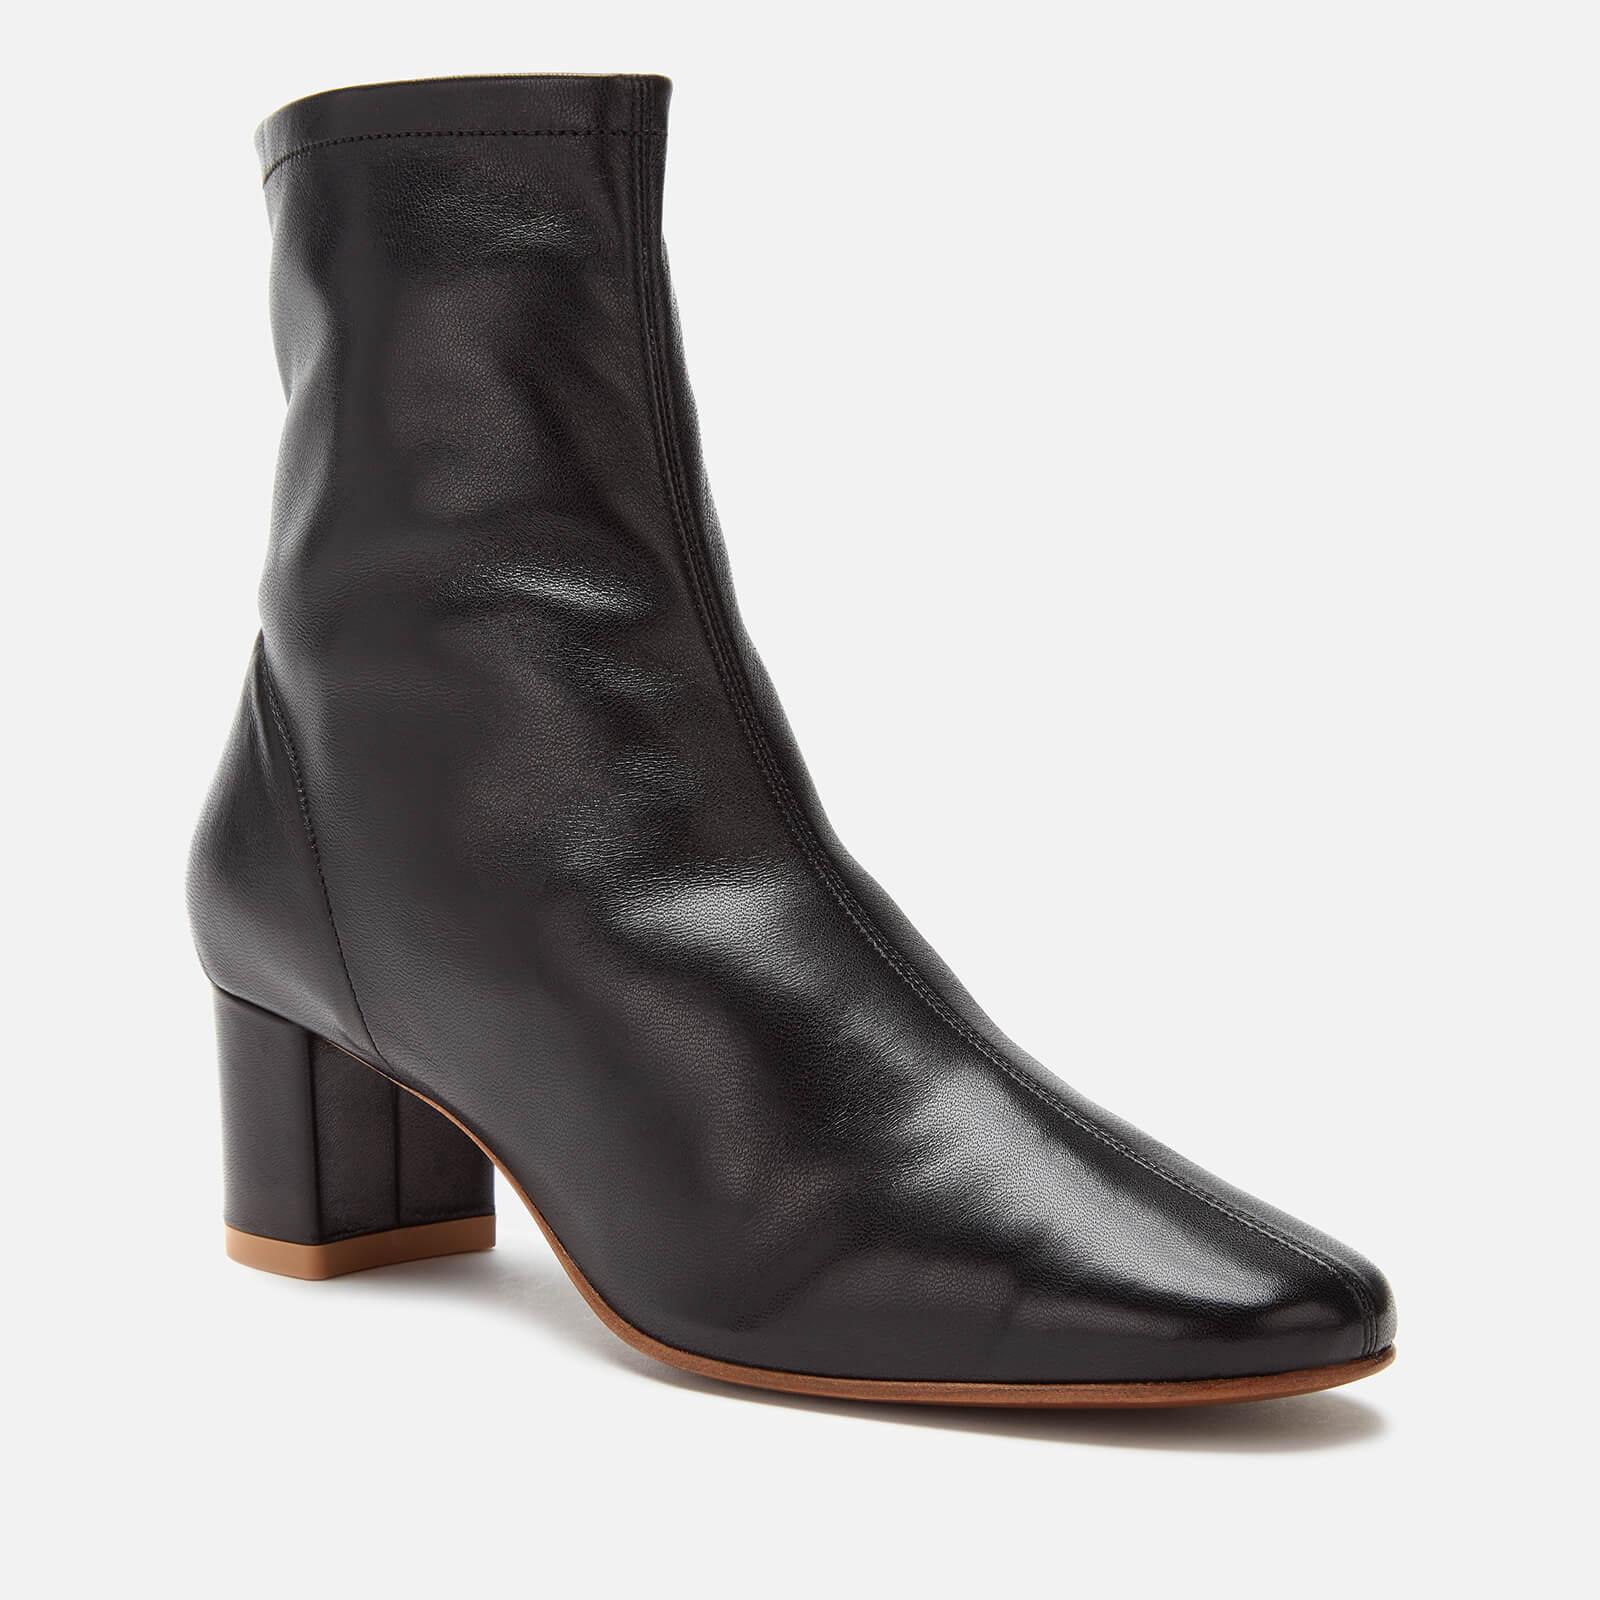 BY FAR Sofia Leather Heeled Boots in Black - Lyst